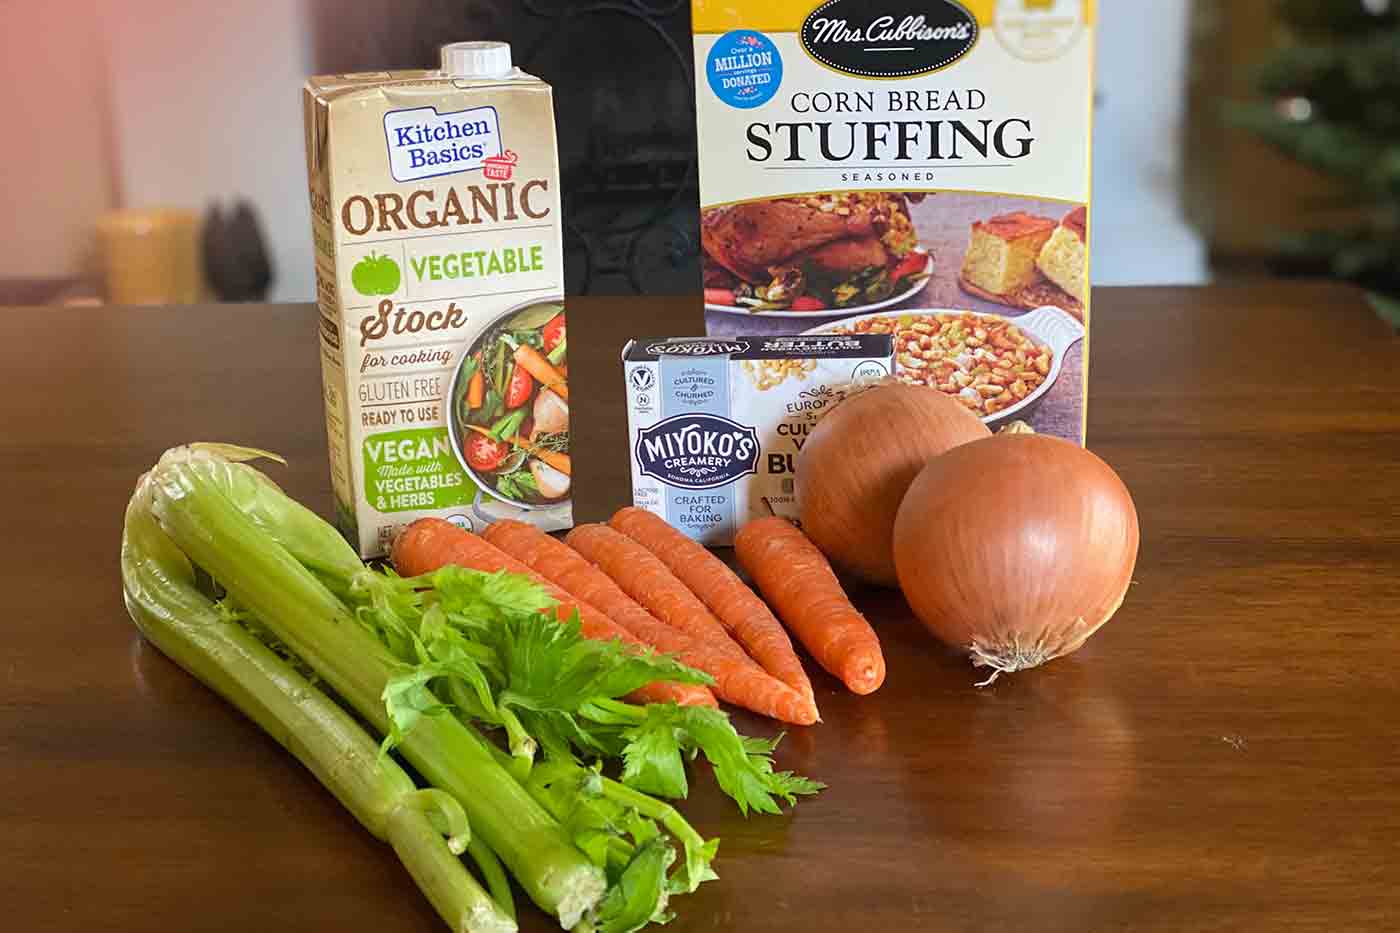 ingredients for vegan cornbread stuffing from Mrs. Cubbison's